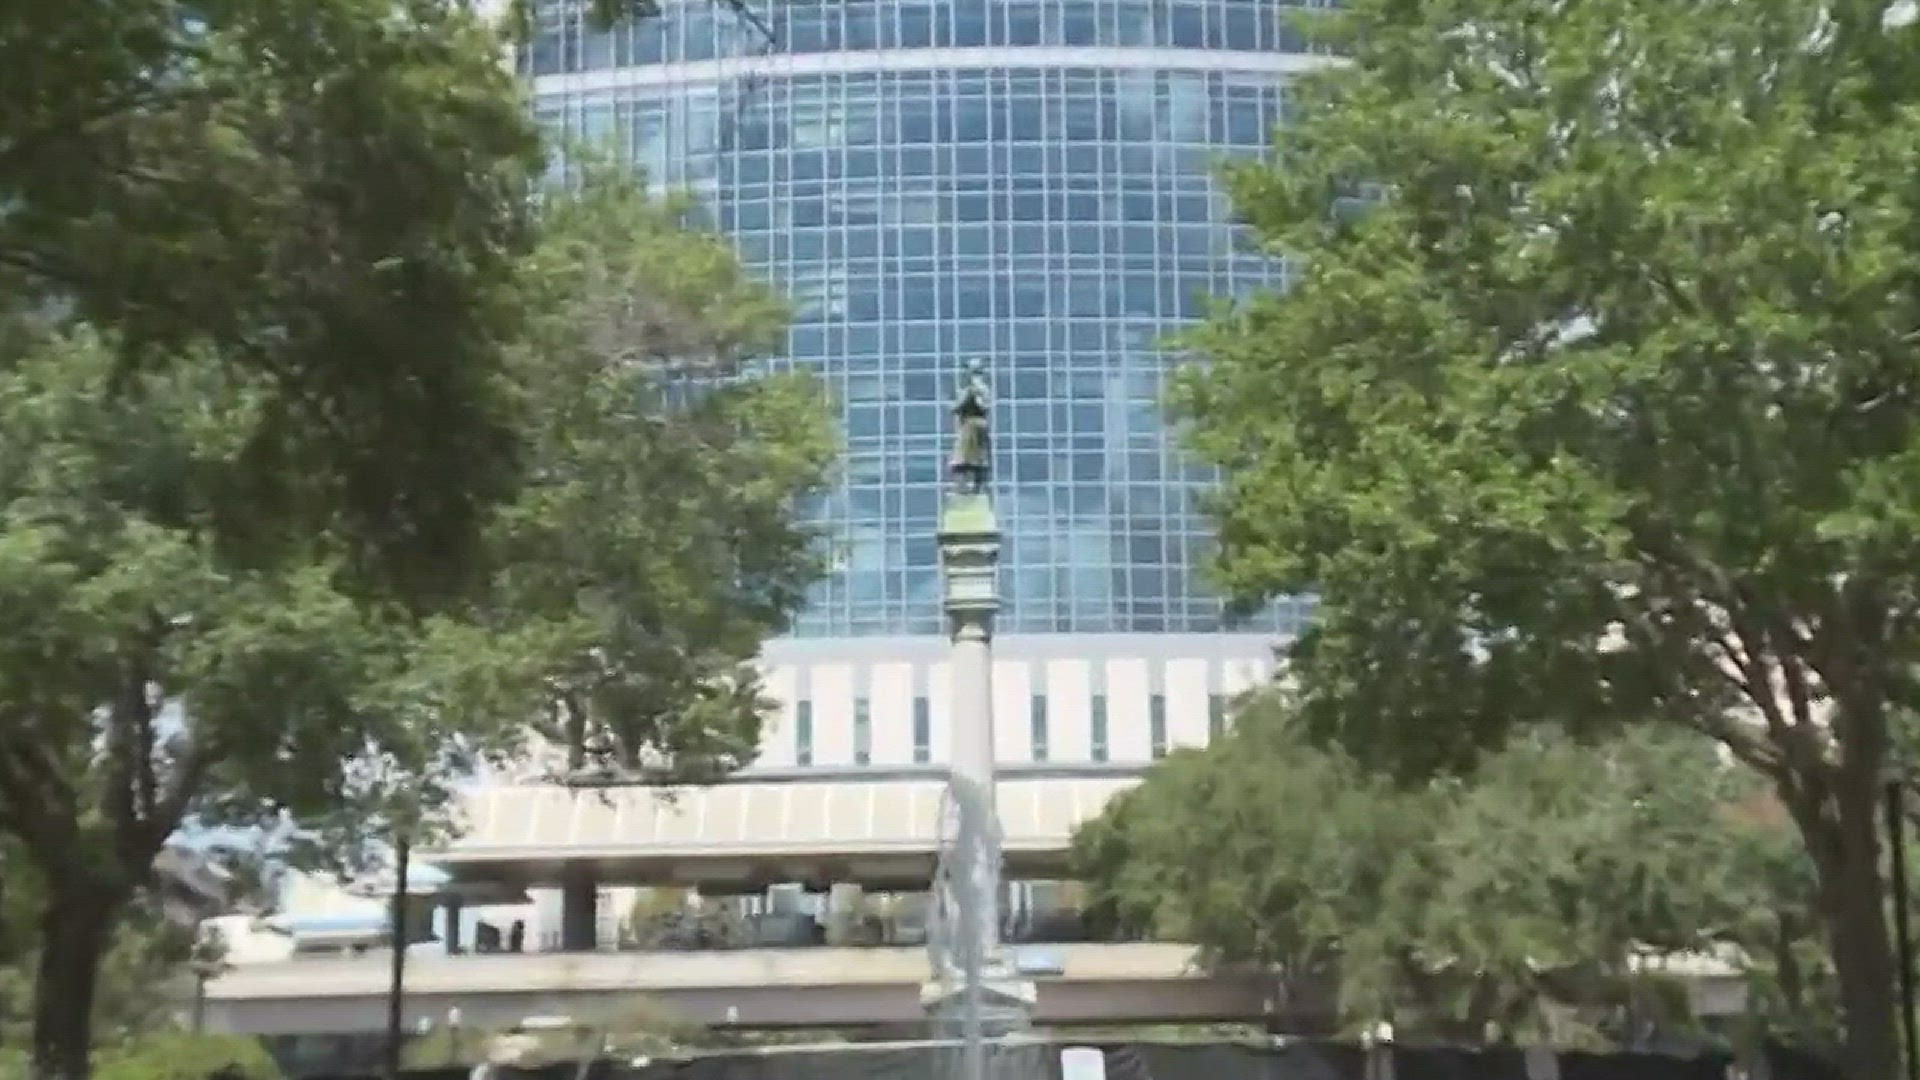 Local group protests removal of Confederate memorials at Hemming Park